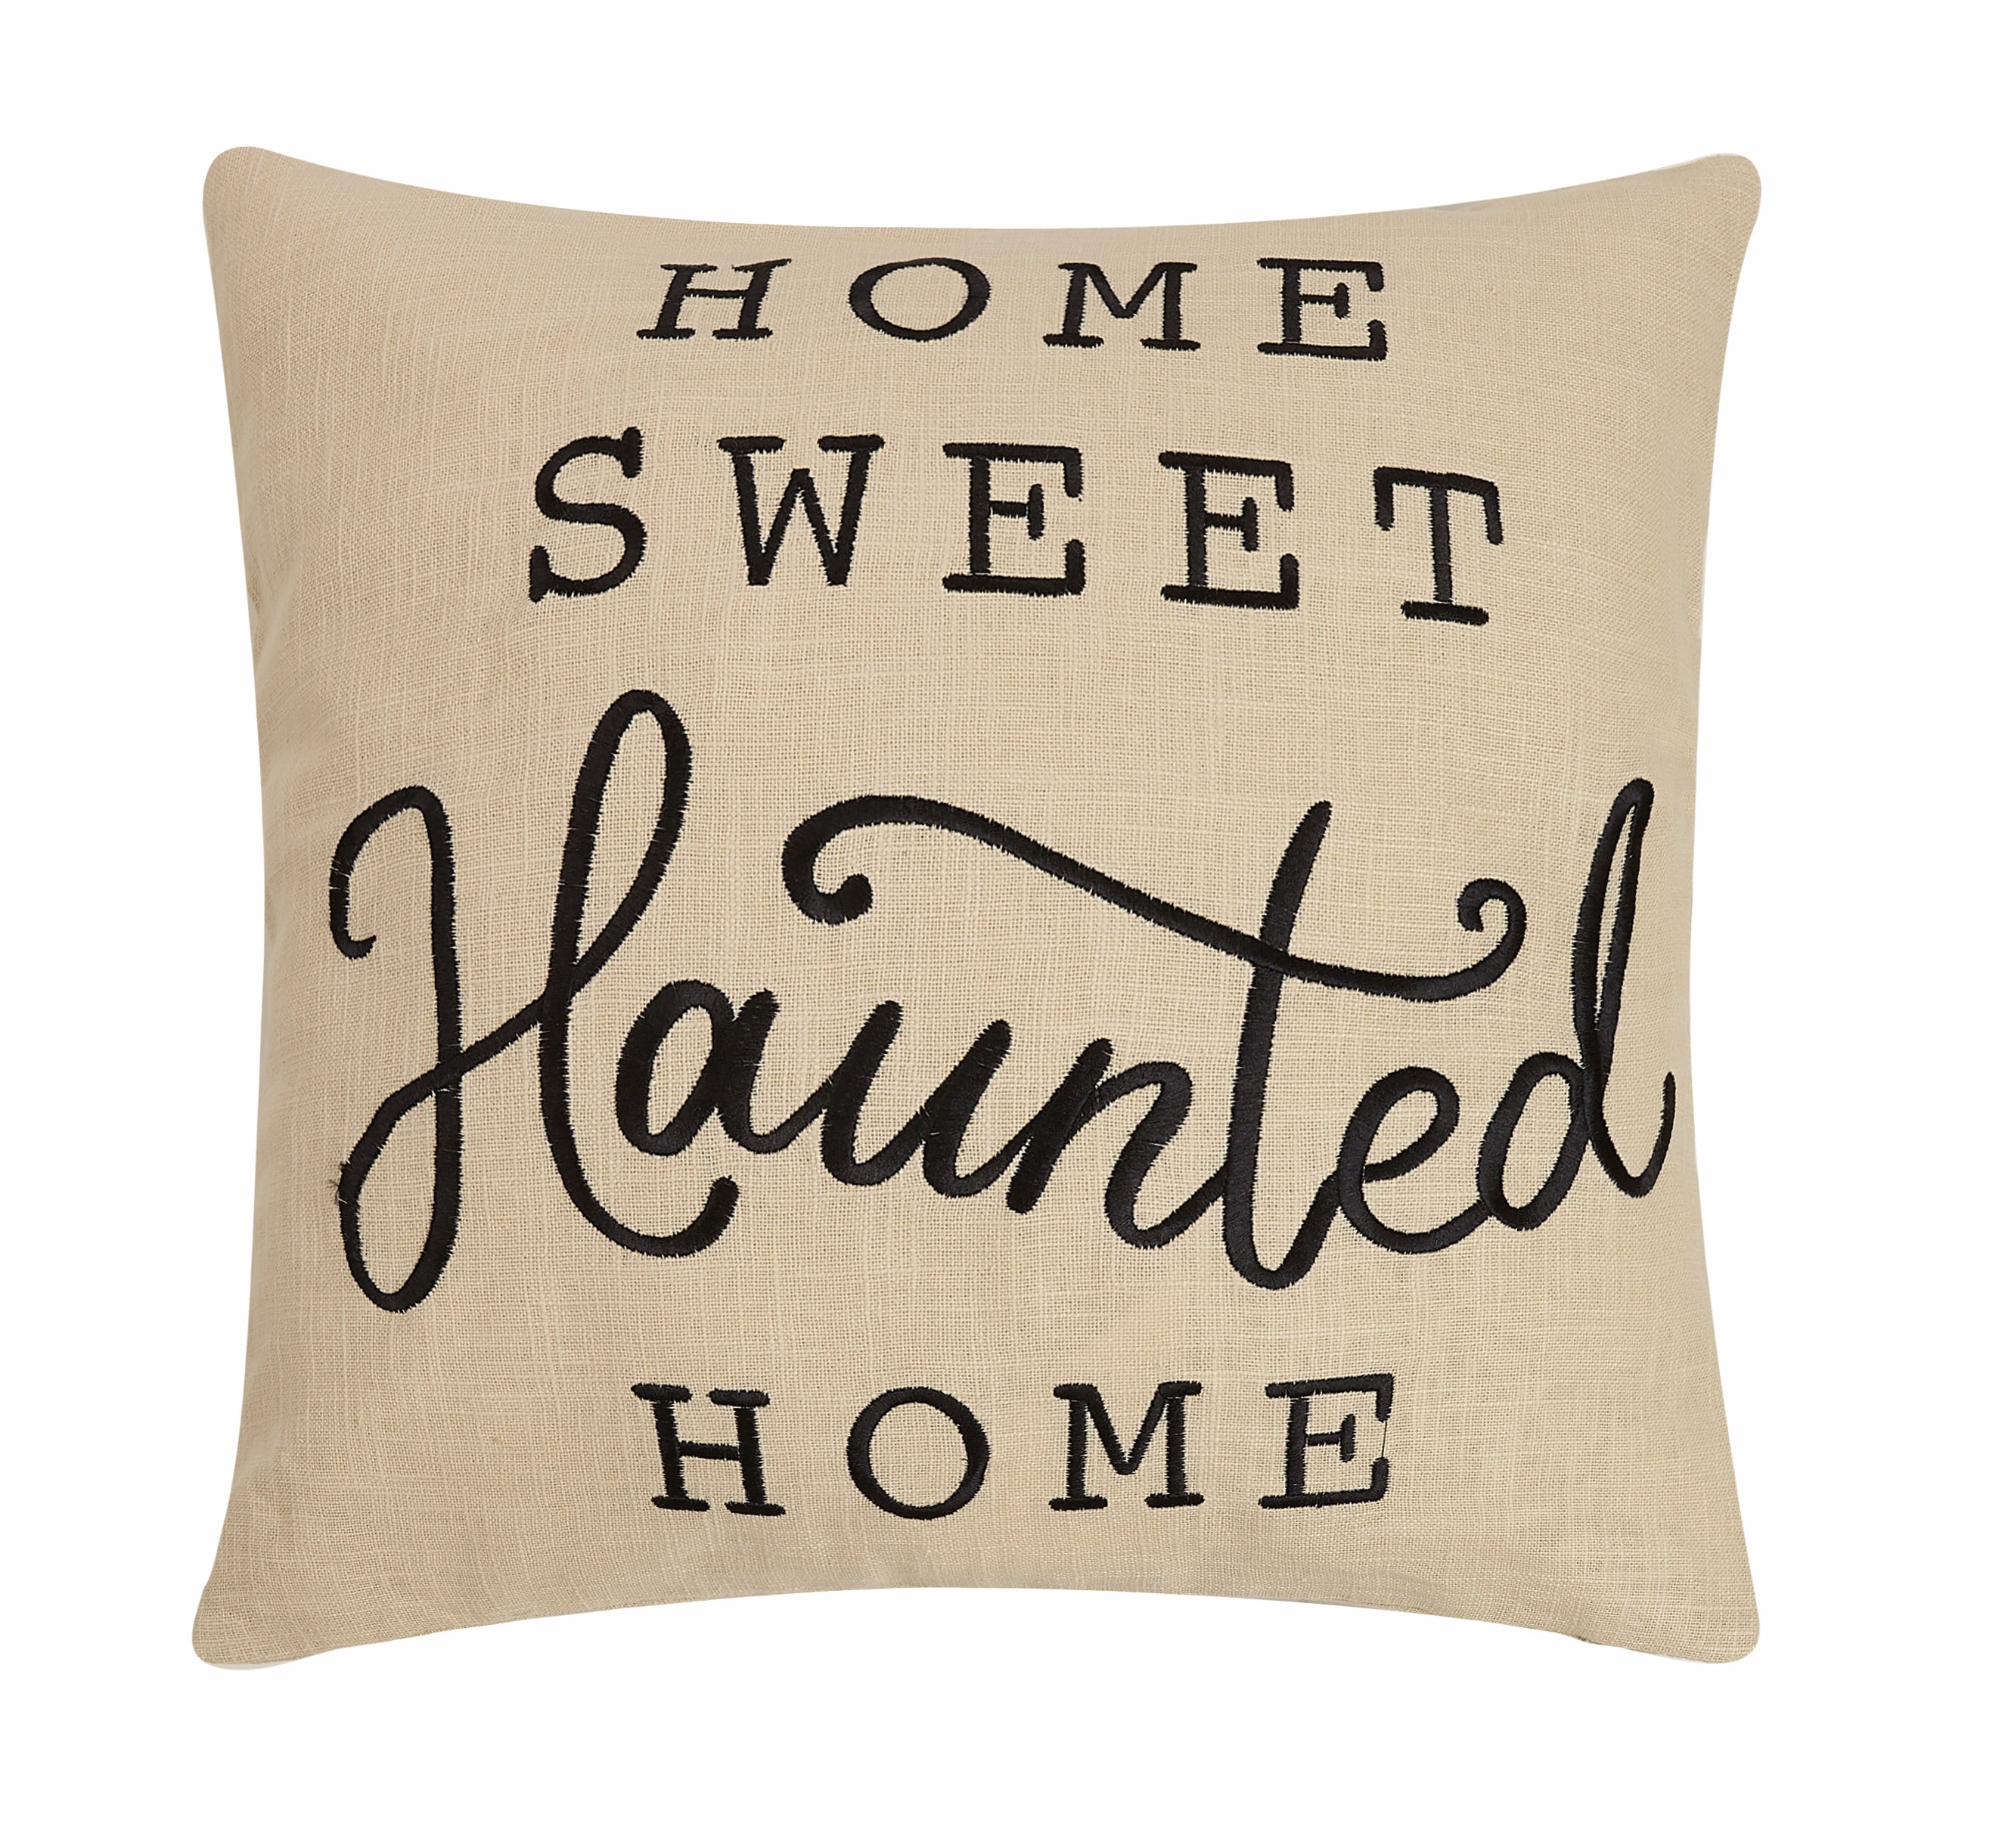 Home Sweet Haunted Home Embroidered Pillow